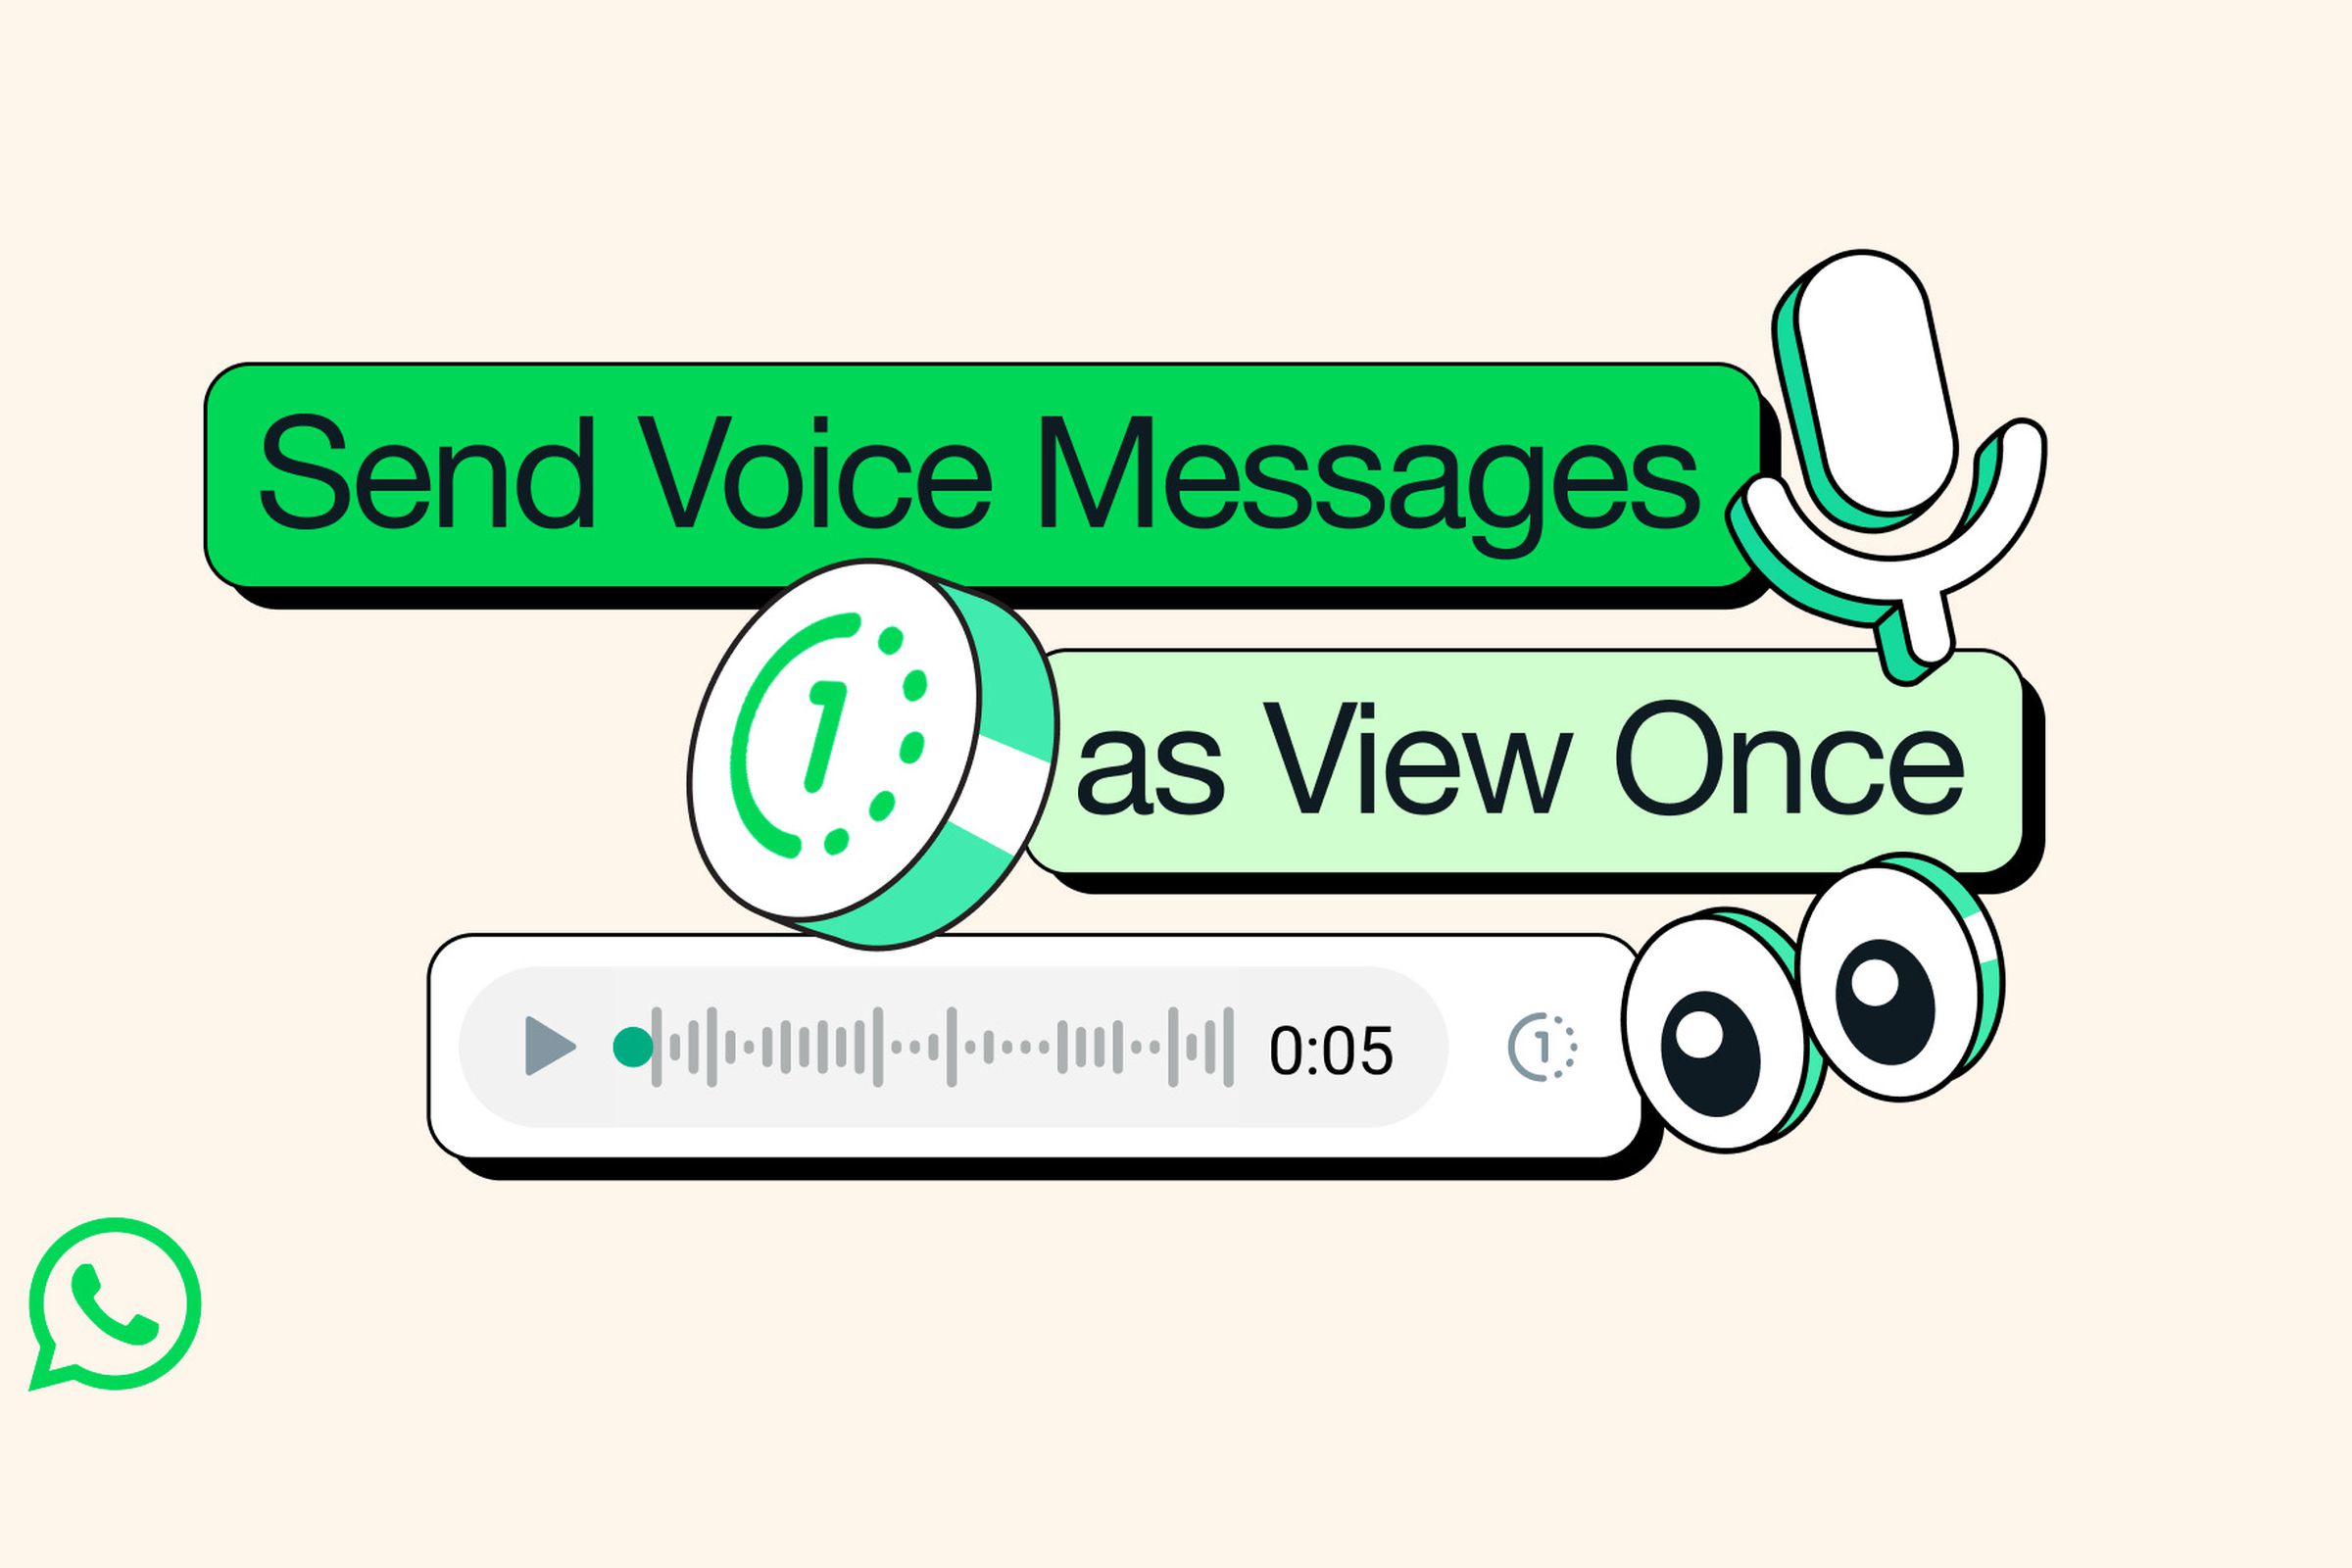 A graphic about sending voice messages as “View Once.”